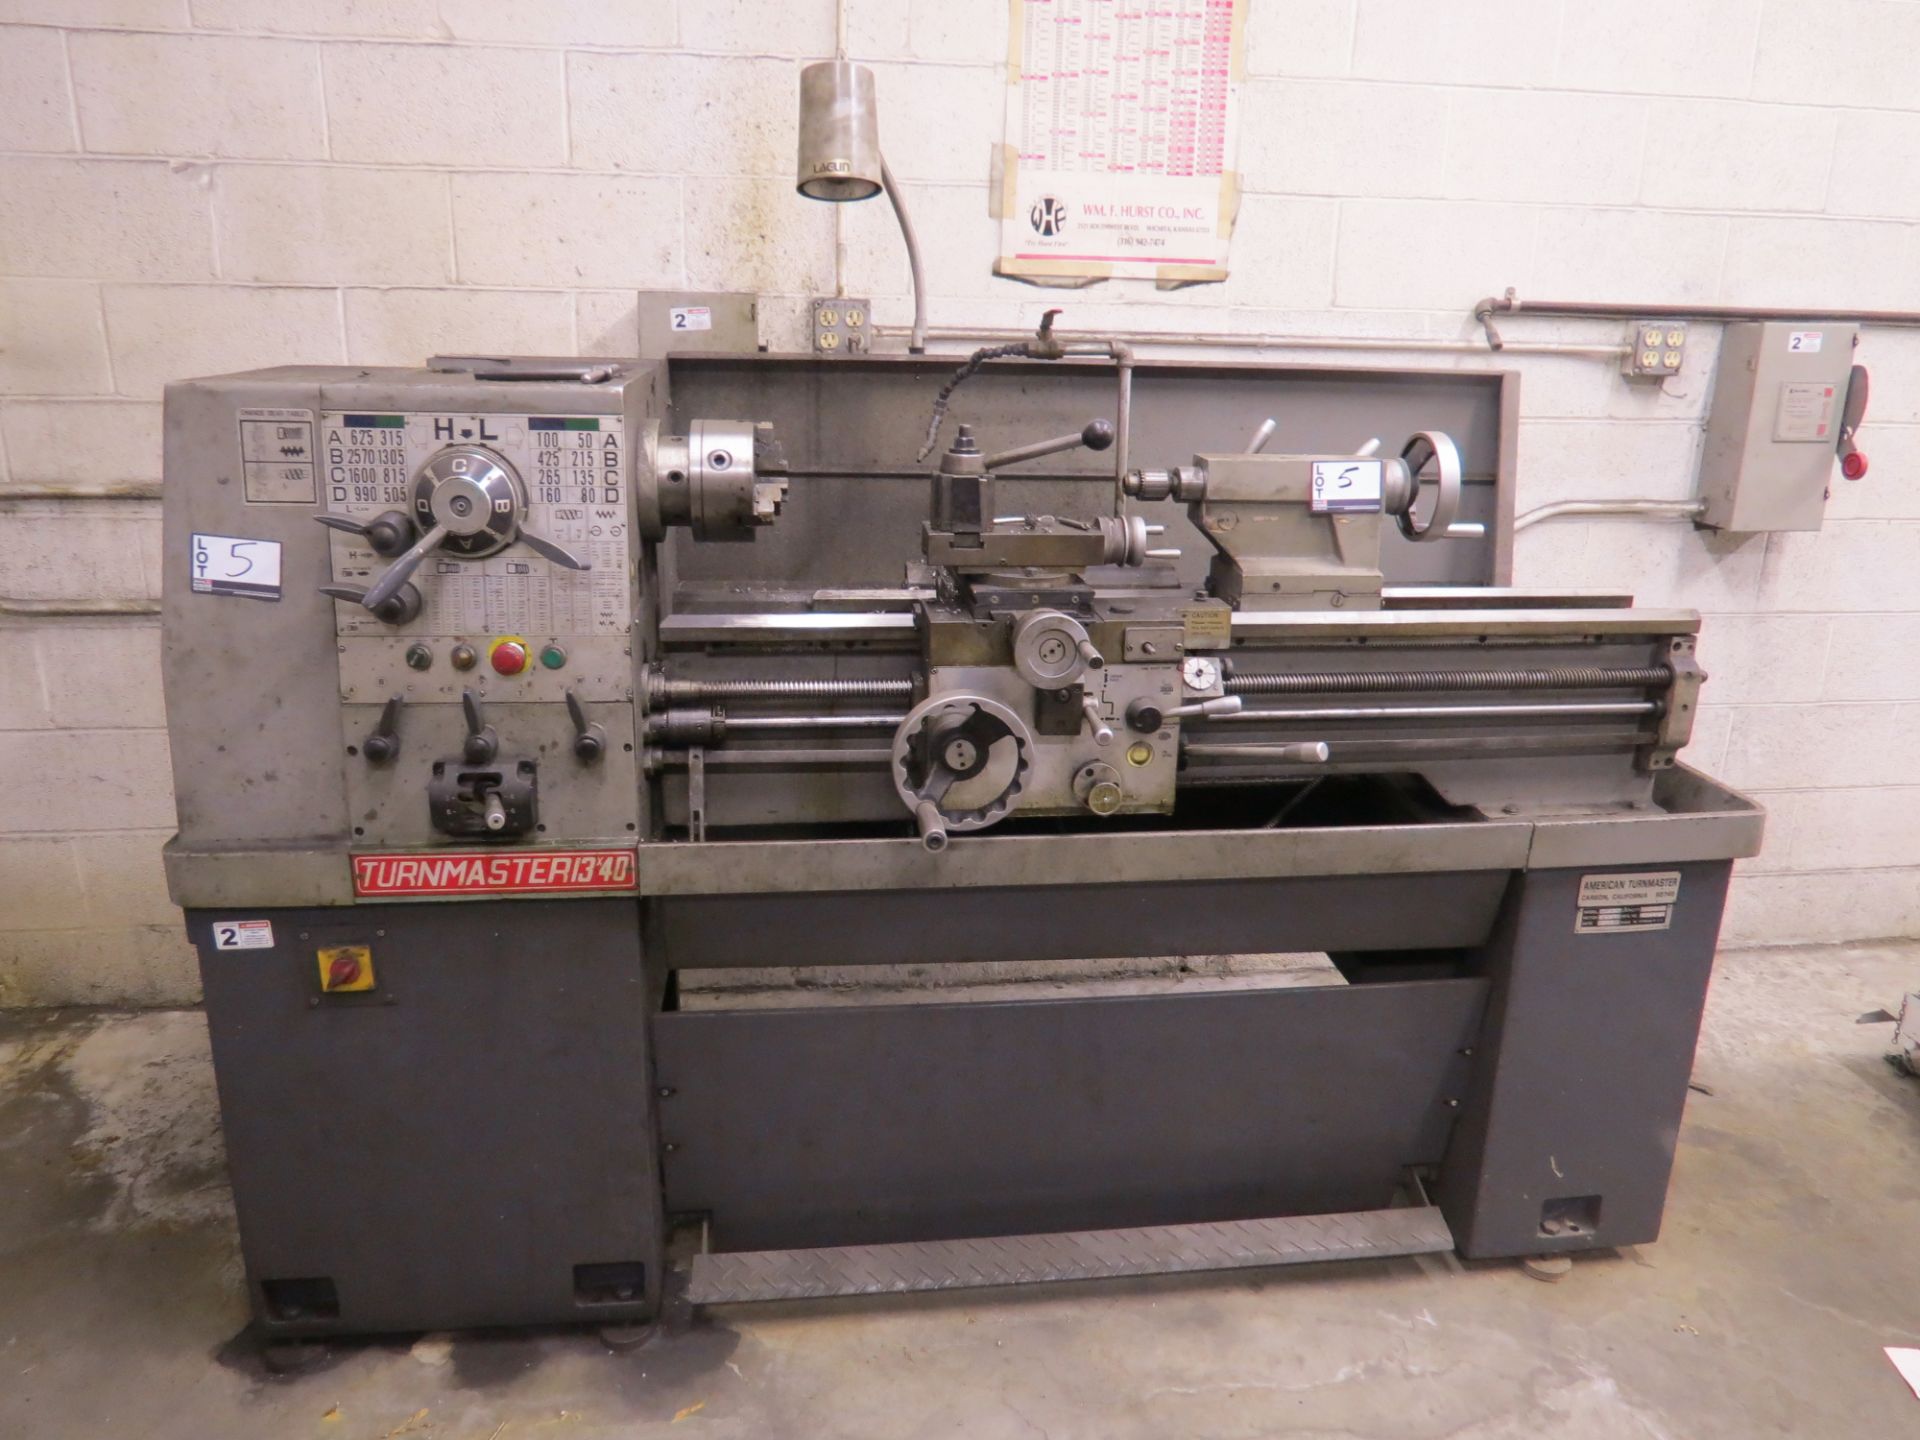 13" x 40" American Turnmaster TRL-1340 Engine Lathe, 3 jaw chuck, tool post, s/n 1349605051269, - Image 2 of 5